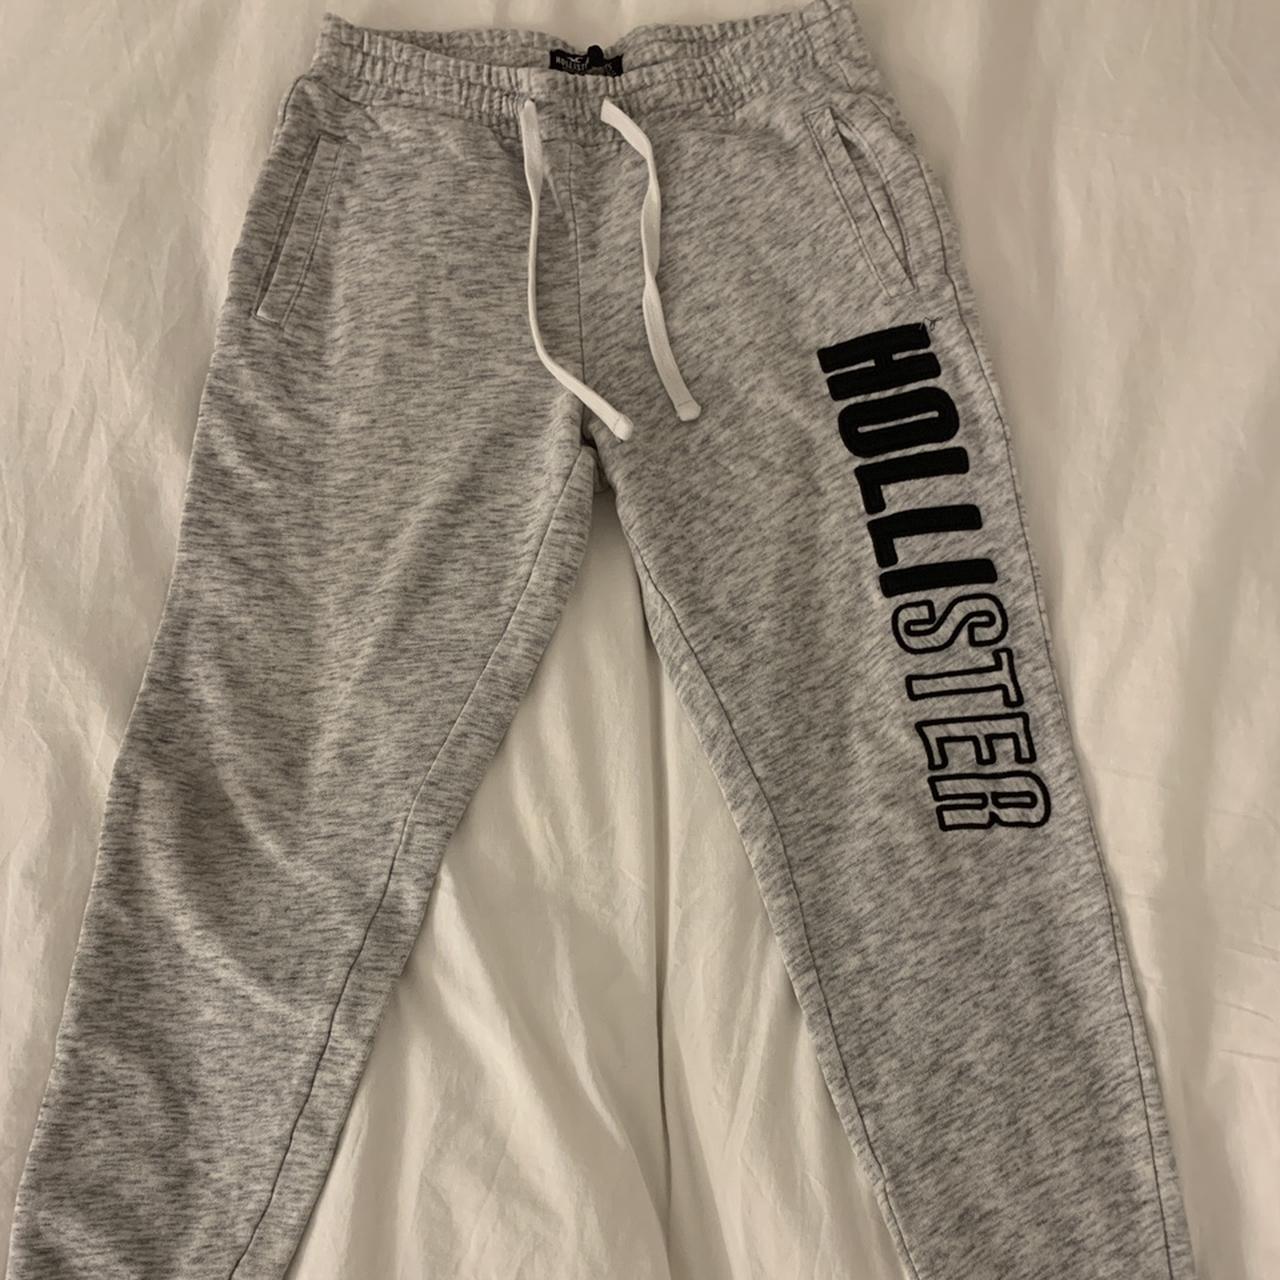 🖤These are gray sweatpants with the label Hollister - Depop